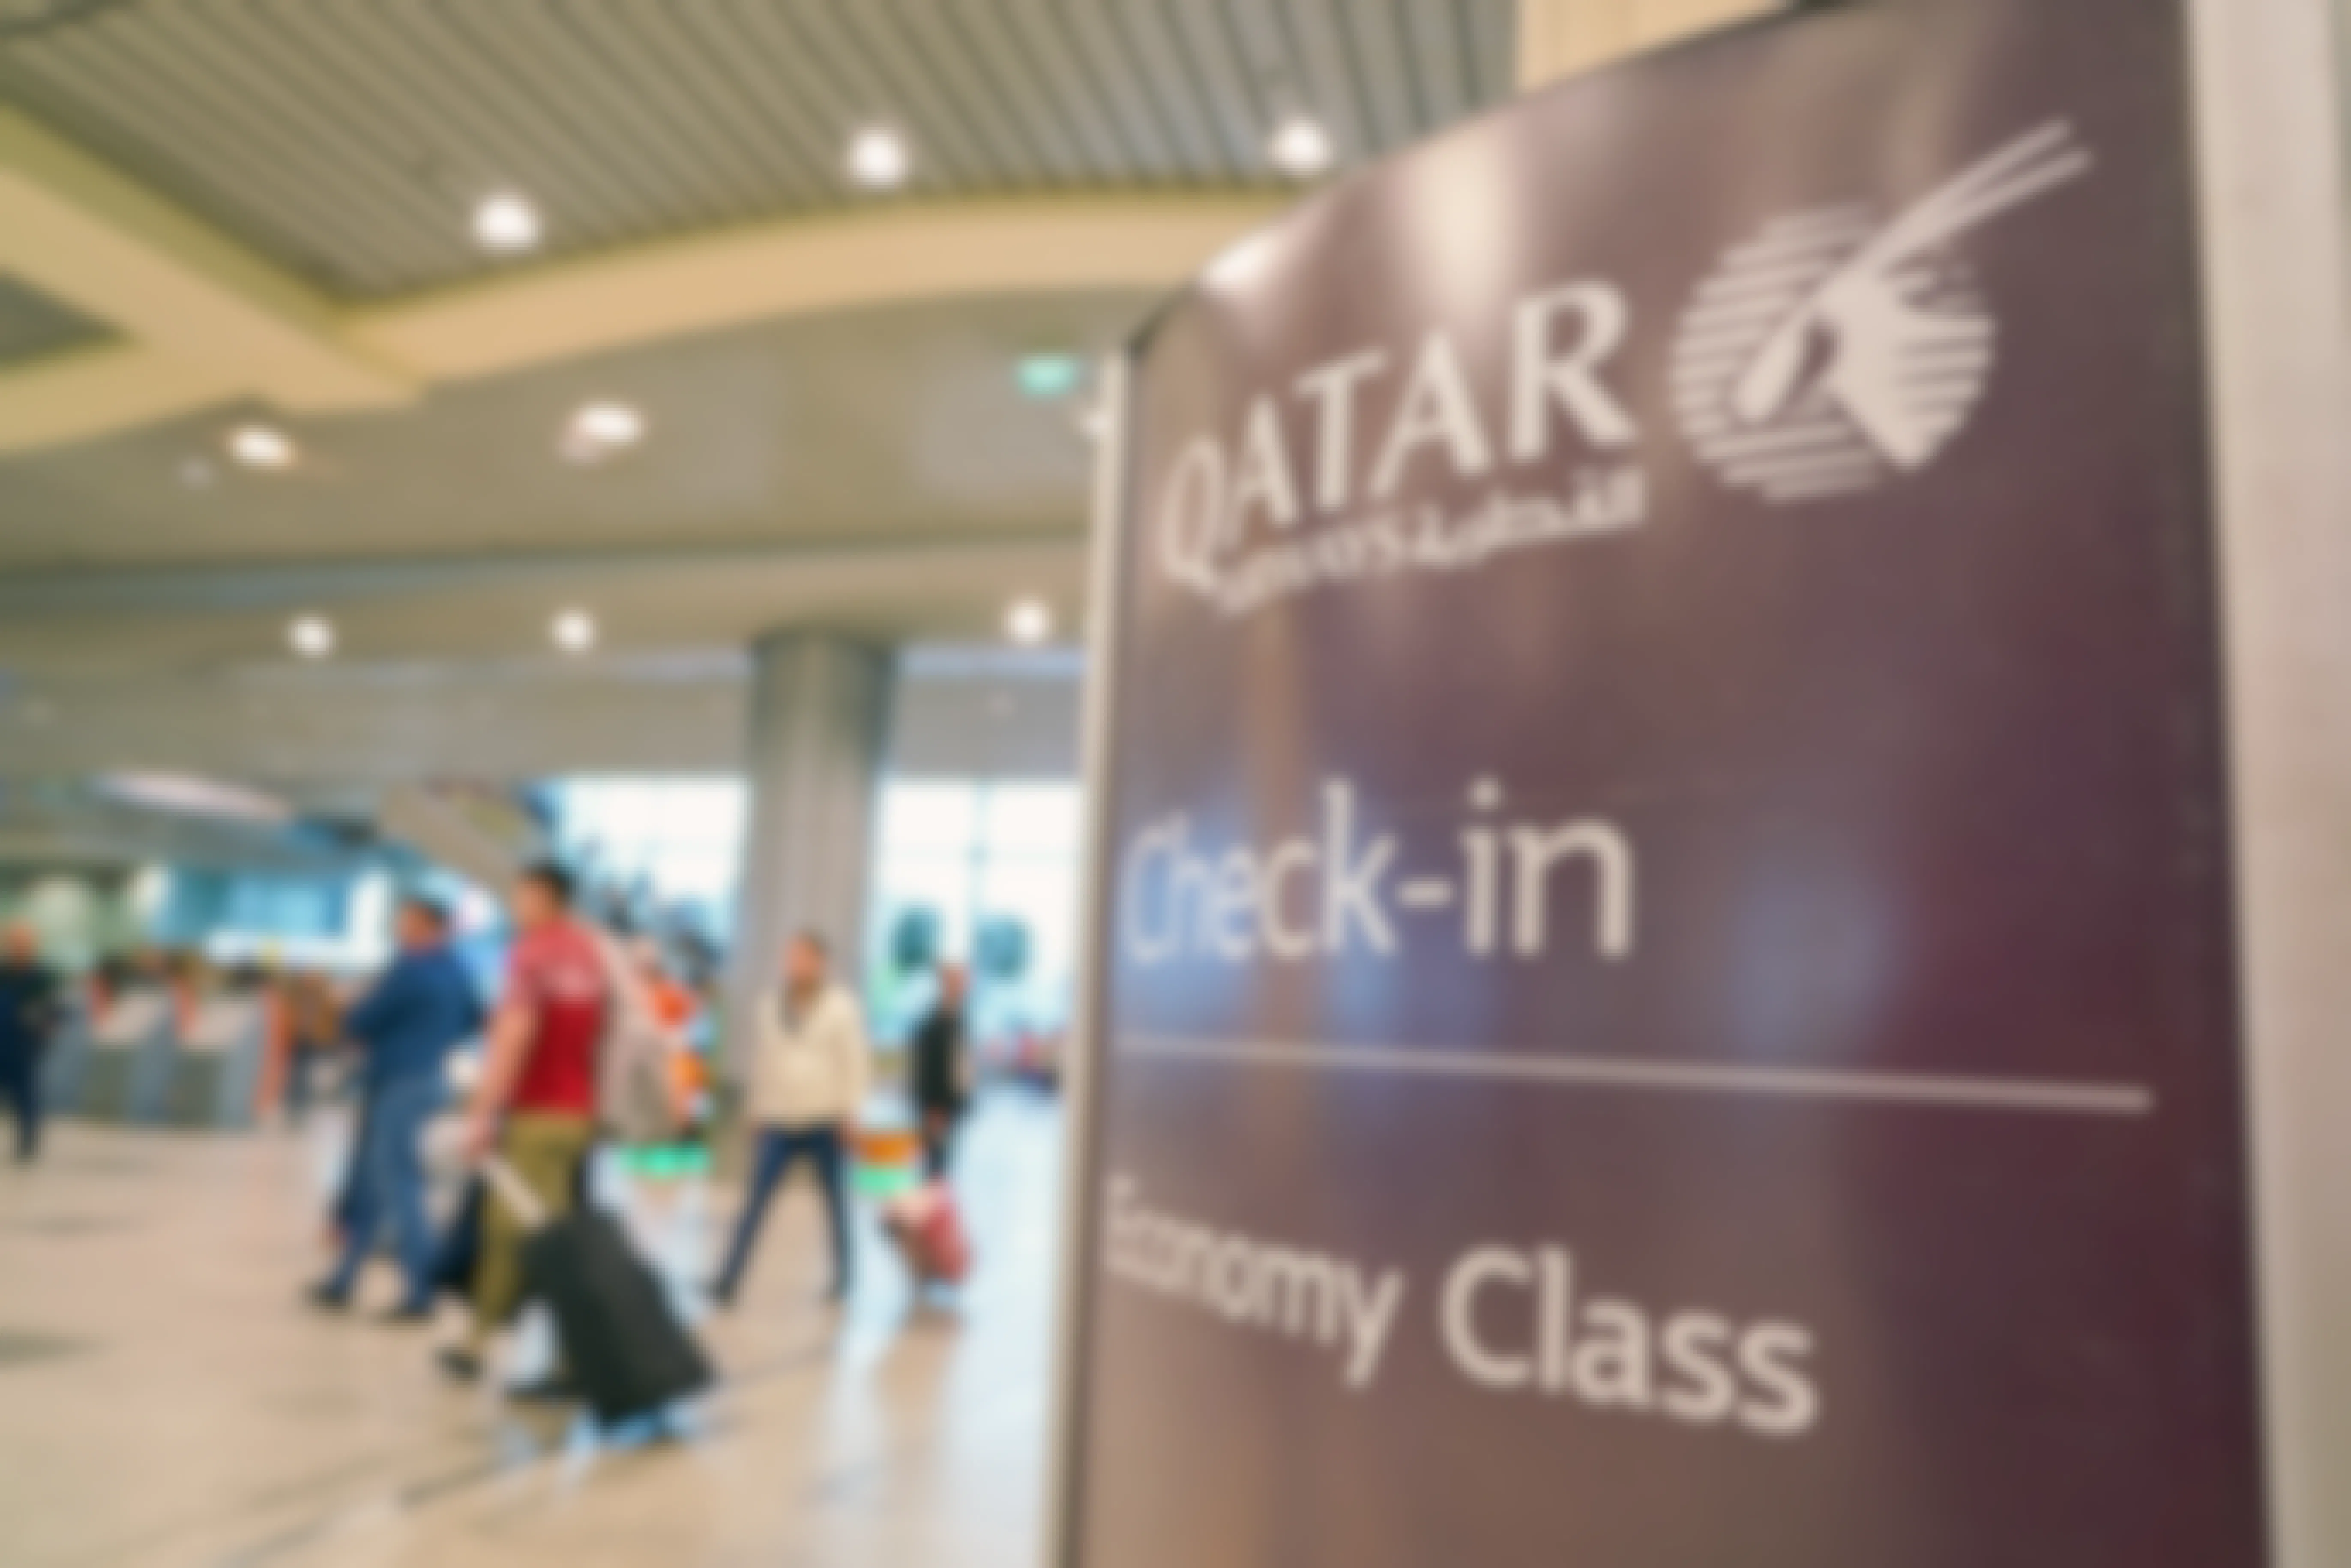 Qatar Airways Check-In sign for Economy Class passengers in the airport.